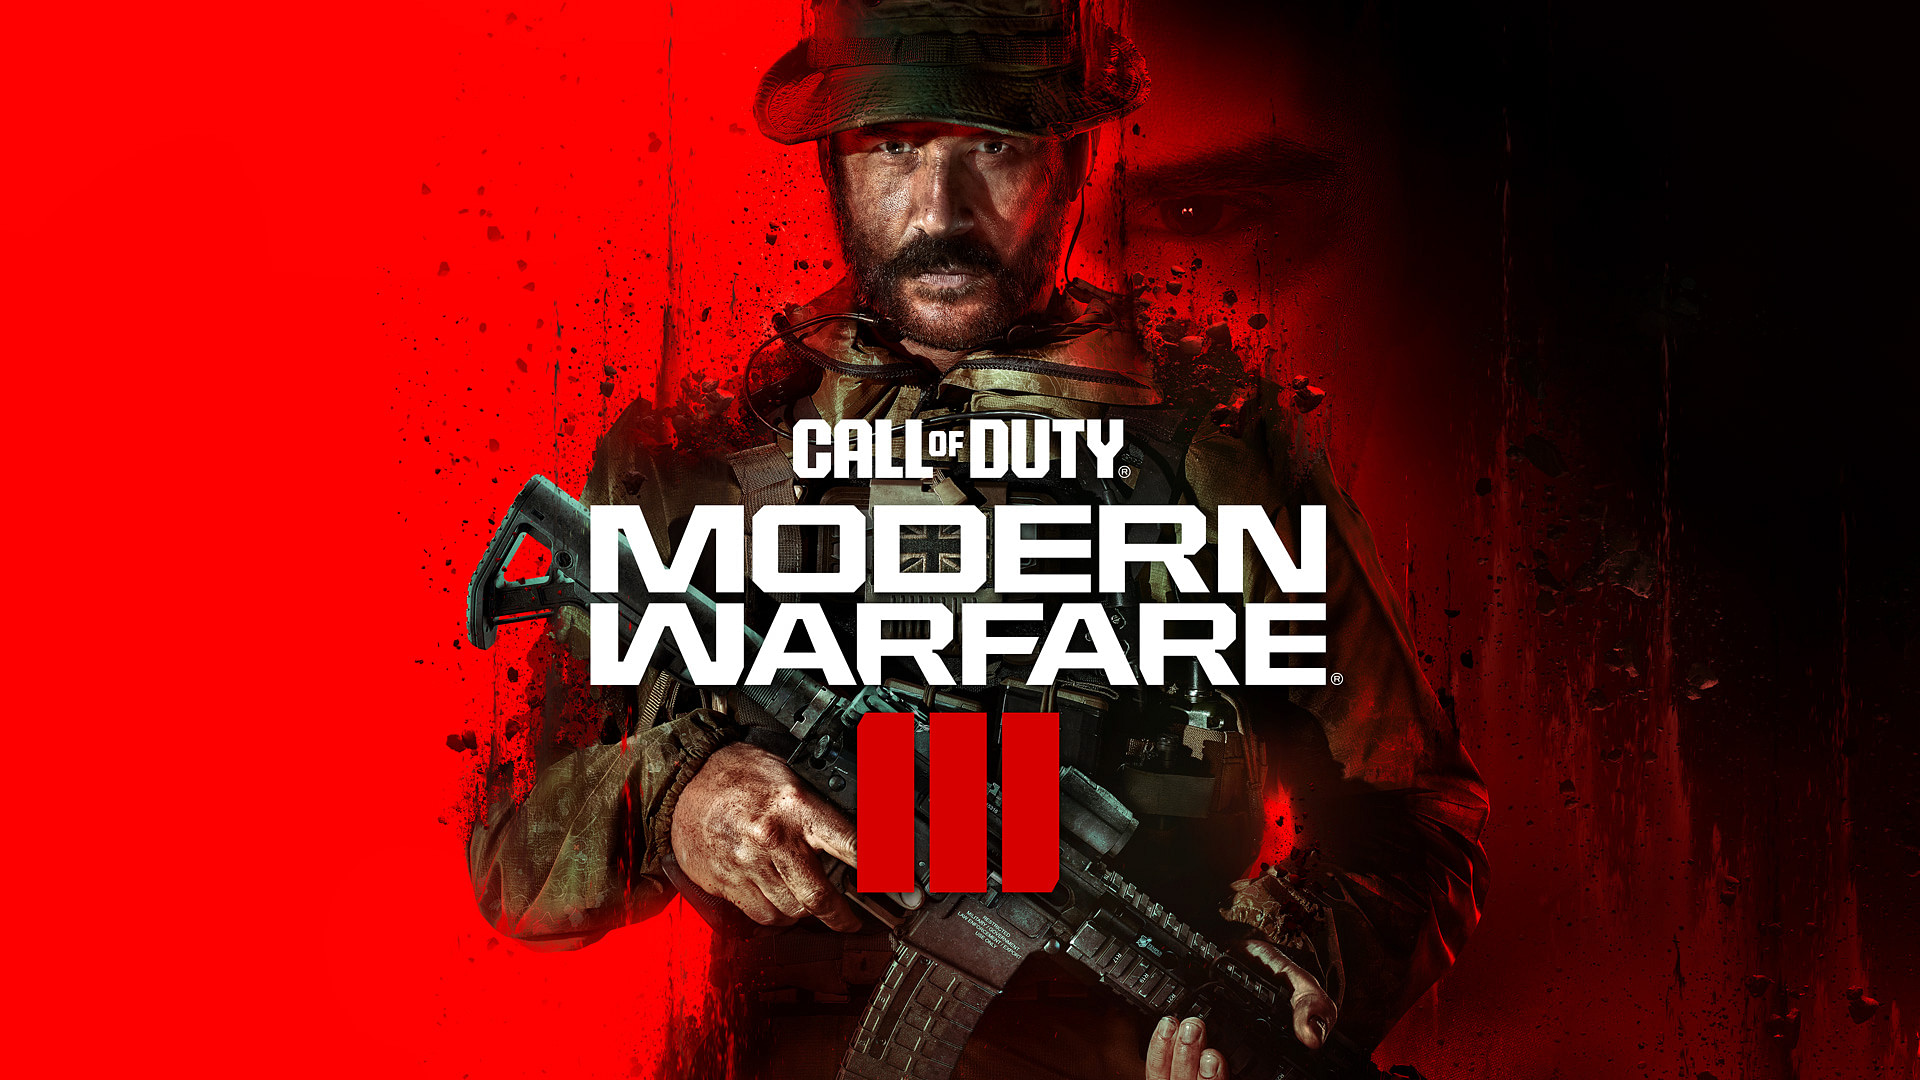 call-of-duty-modern-warfare-3-will-feature-all-classic-maps-from-mw2-2009-why-aren-t-fans